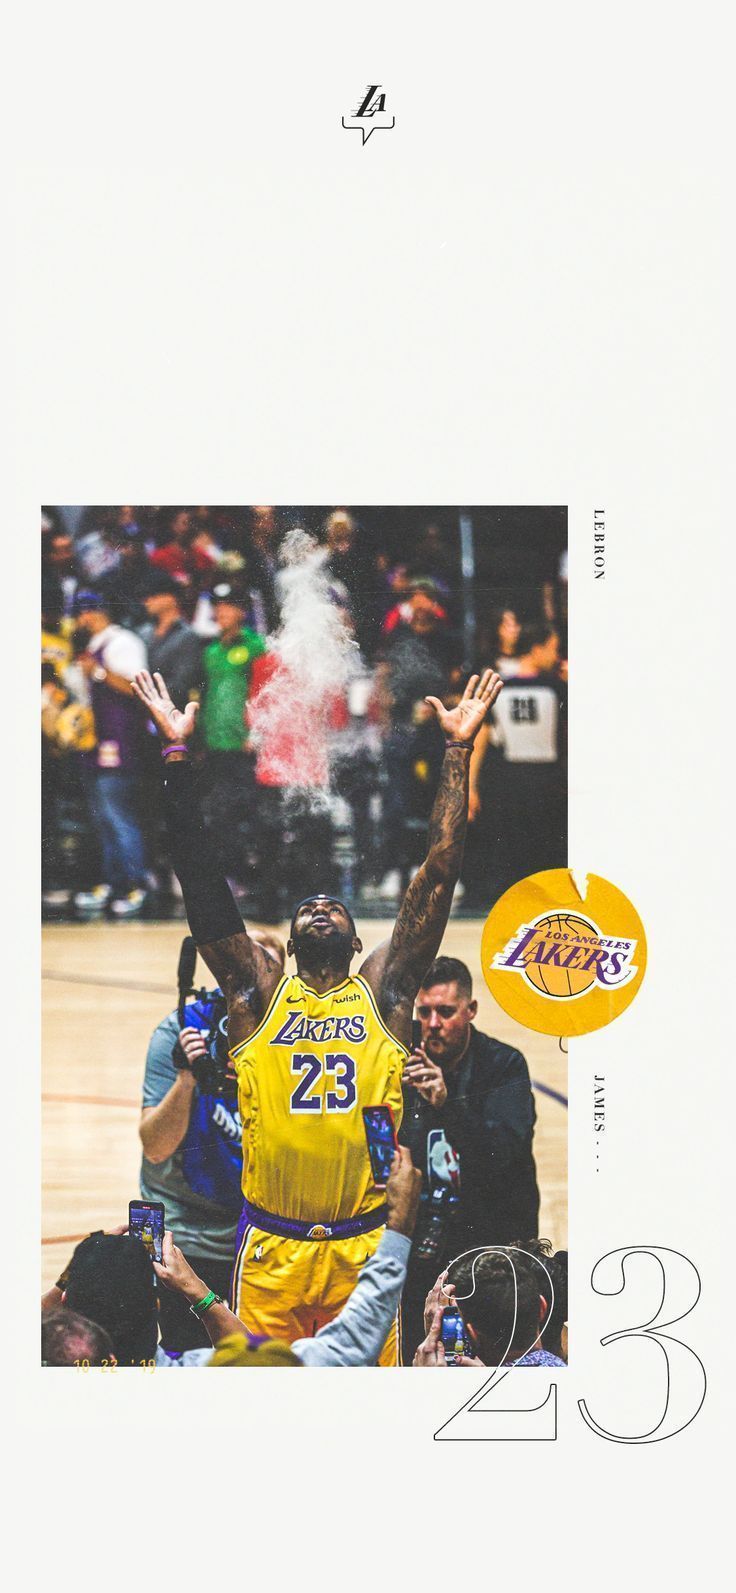 LeBron James celebrating with the Lakers team during a game. - Los Angeles Lakers, Lebron James